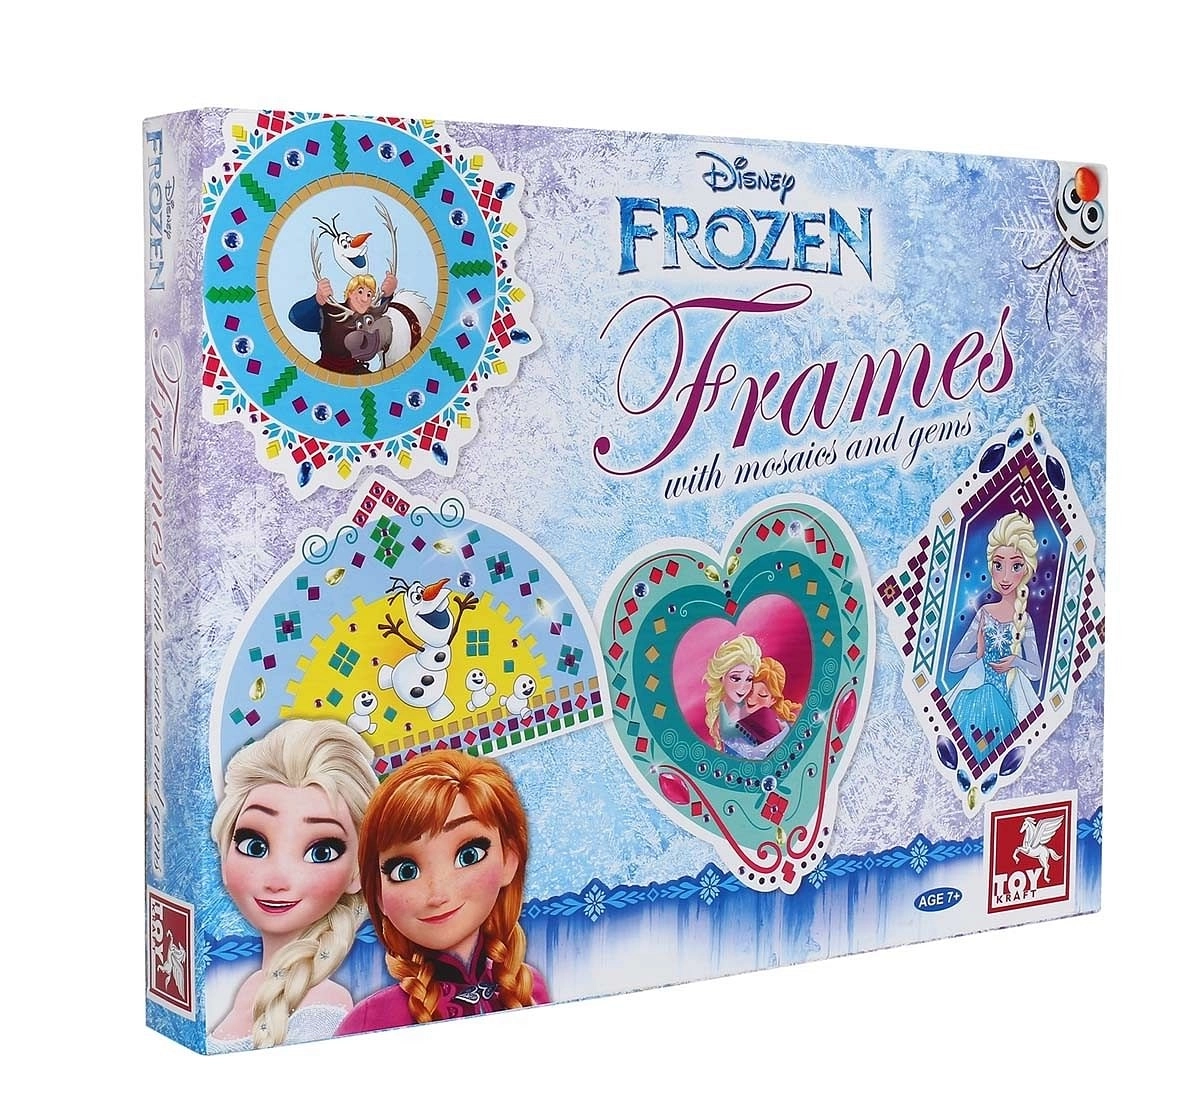 Toy Kraft Disney Frozen Frames With Mosaic and Gems, Multi Color DIY Art & Craft Kits for Kids age 7Y+ 